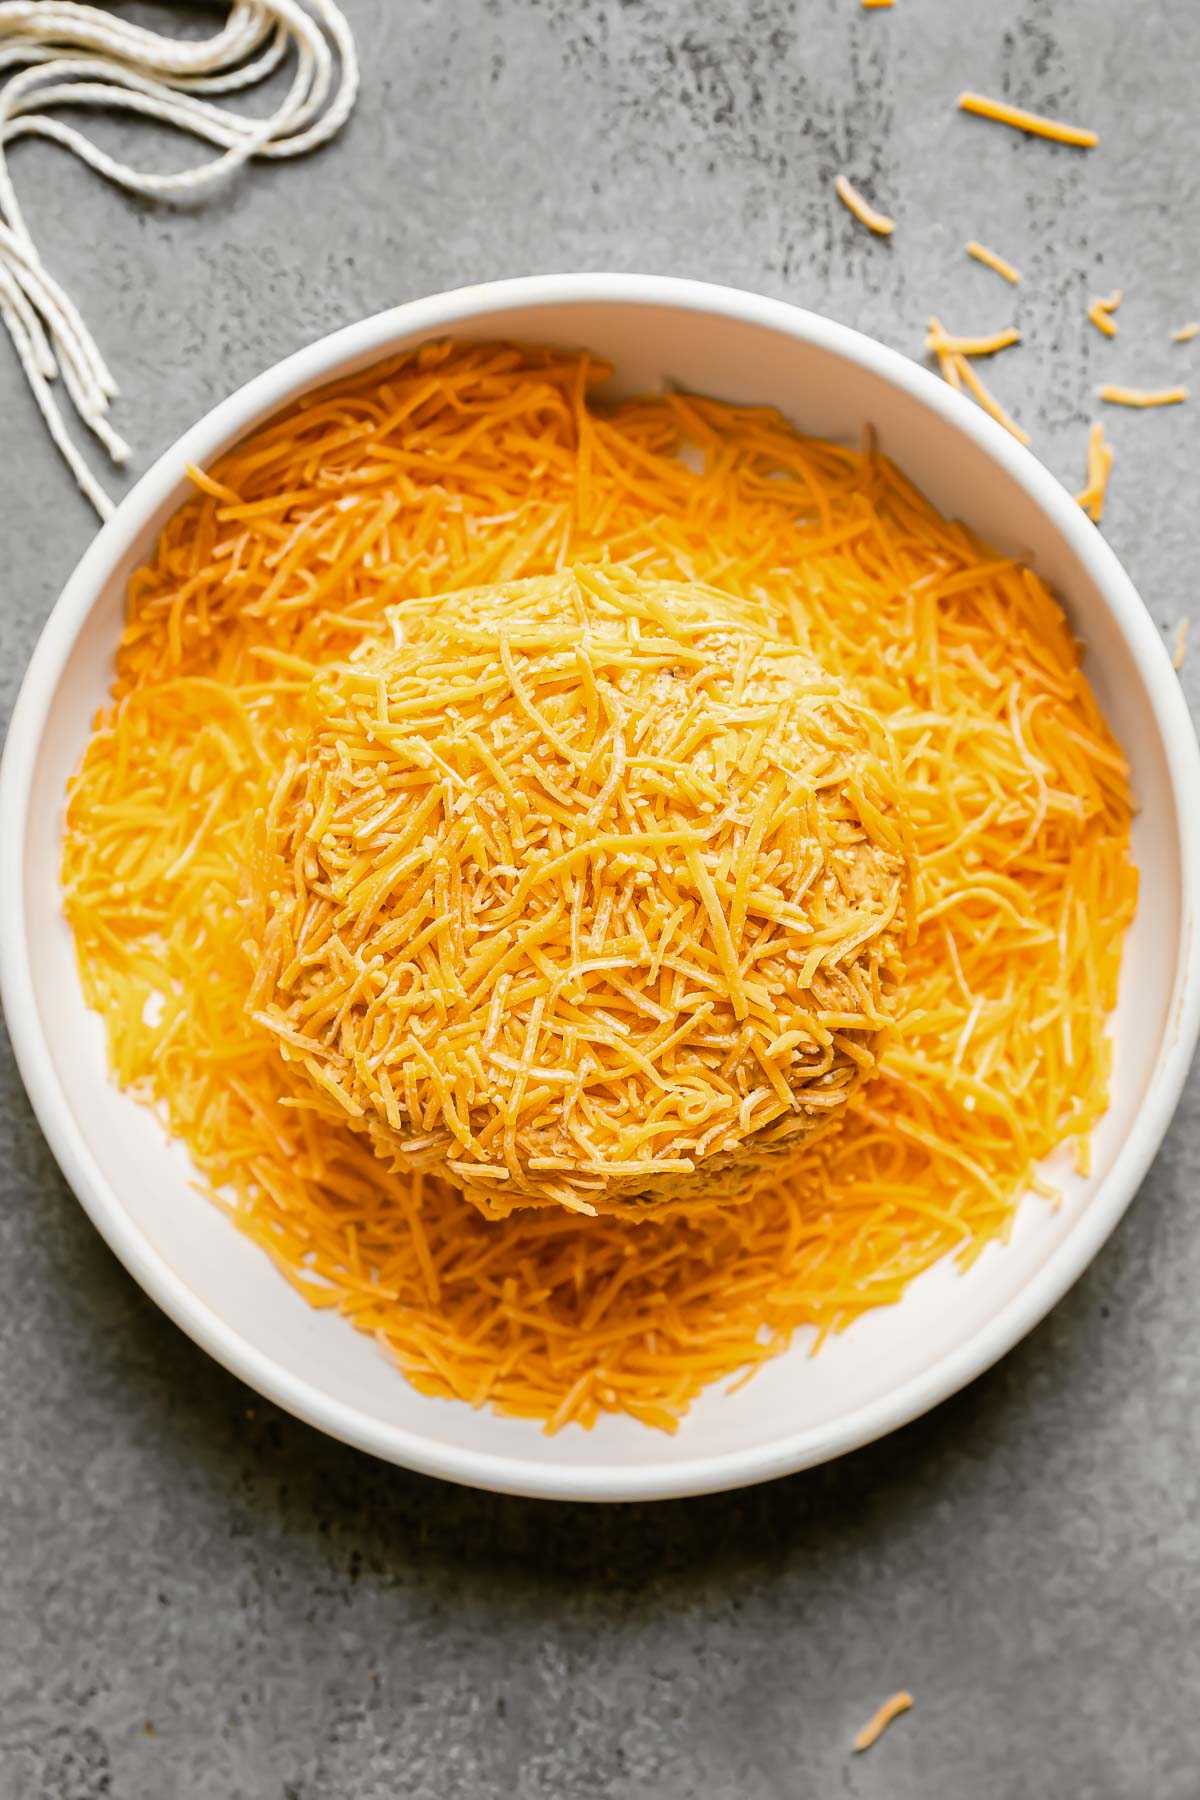 A pumpkin-shaped cheese ball is placed inside a shallow ceramic dish filled with shredded cheddar cheese. The cheese ball gets coated in shredded cheddar cheese and the ceramic dish sits atop a gray textured surface. Loose shredded cheddar cheese and cut strands of kitchen twine surround the dish at center.